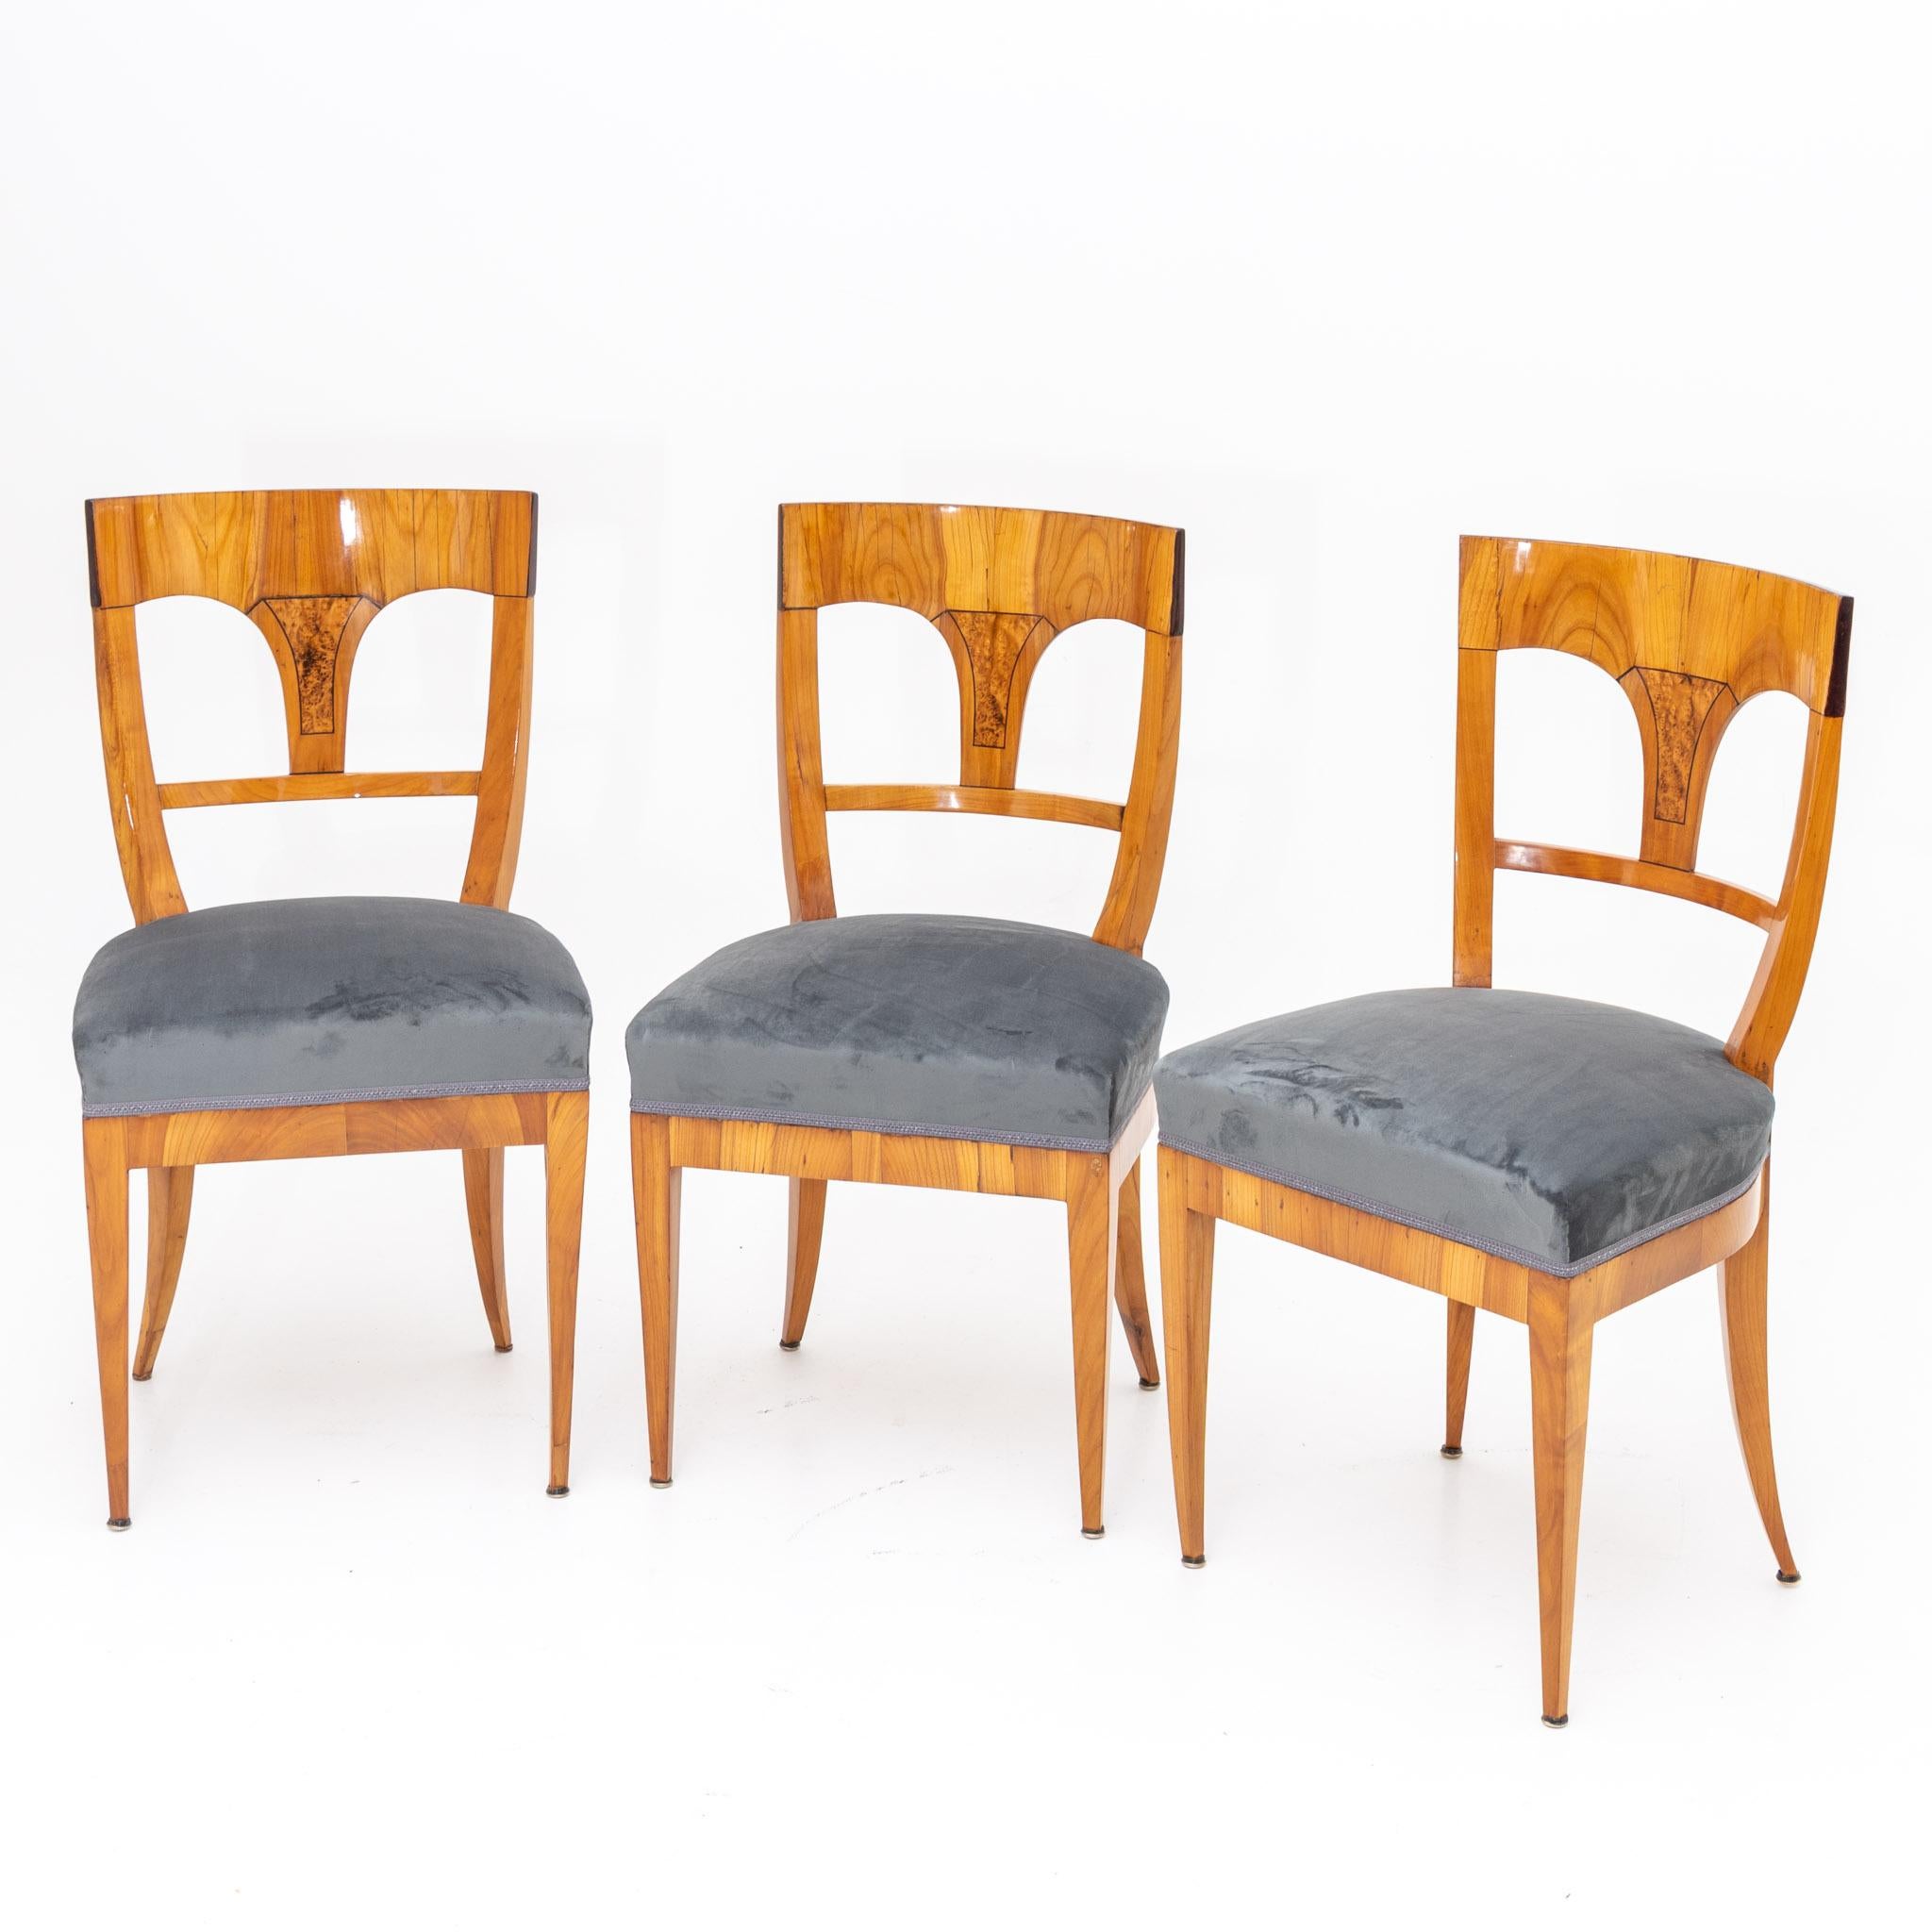 Set of three Biedermeier chairs in cherry with trapezoidal openwork backrest with straight top rail and center splat with inlaid birch burl veneer. The seats are reupholstered with a gray-blue velvet fabric.